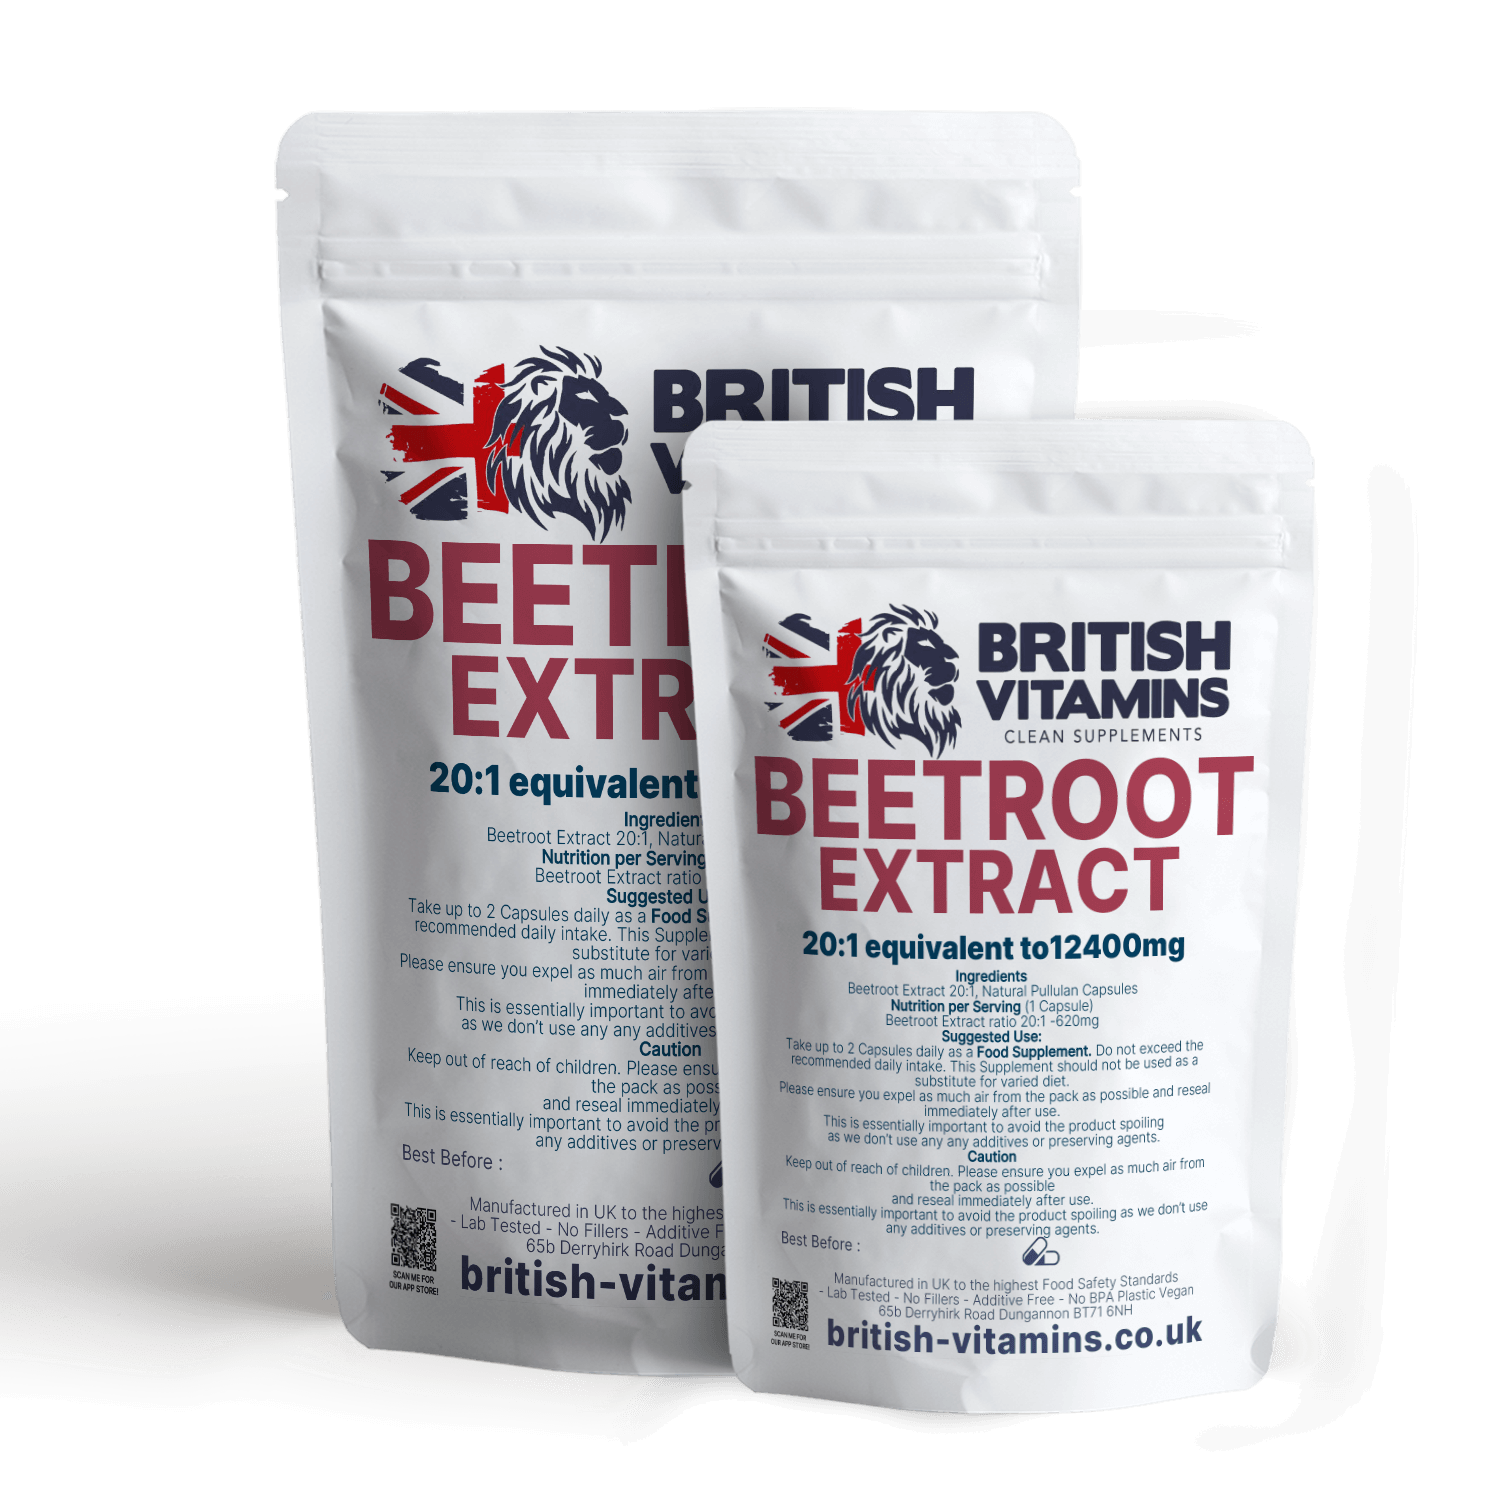 Beetroot Extract Clean 620mg 12400mg Natural Vegan Capsules Health & Beauty:Vitamins & Lifestyle Supplements:Vitamins & Minerals British Vitamins 5 Capsules  